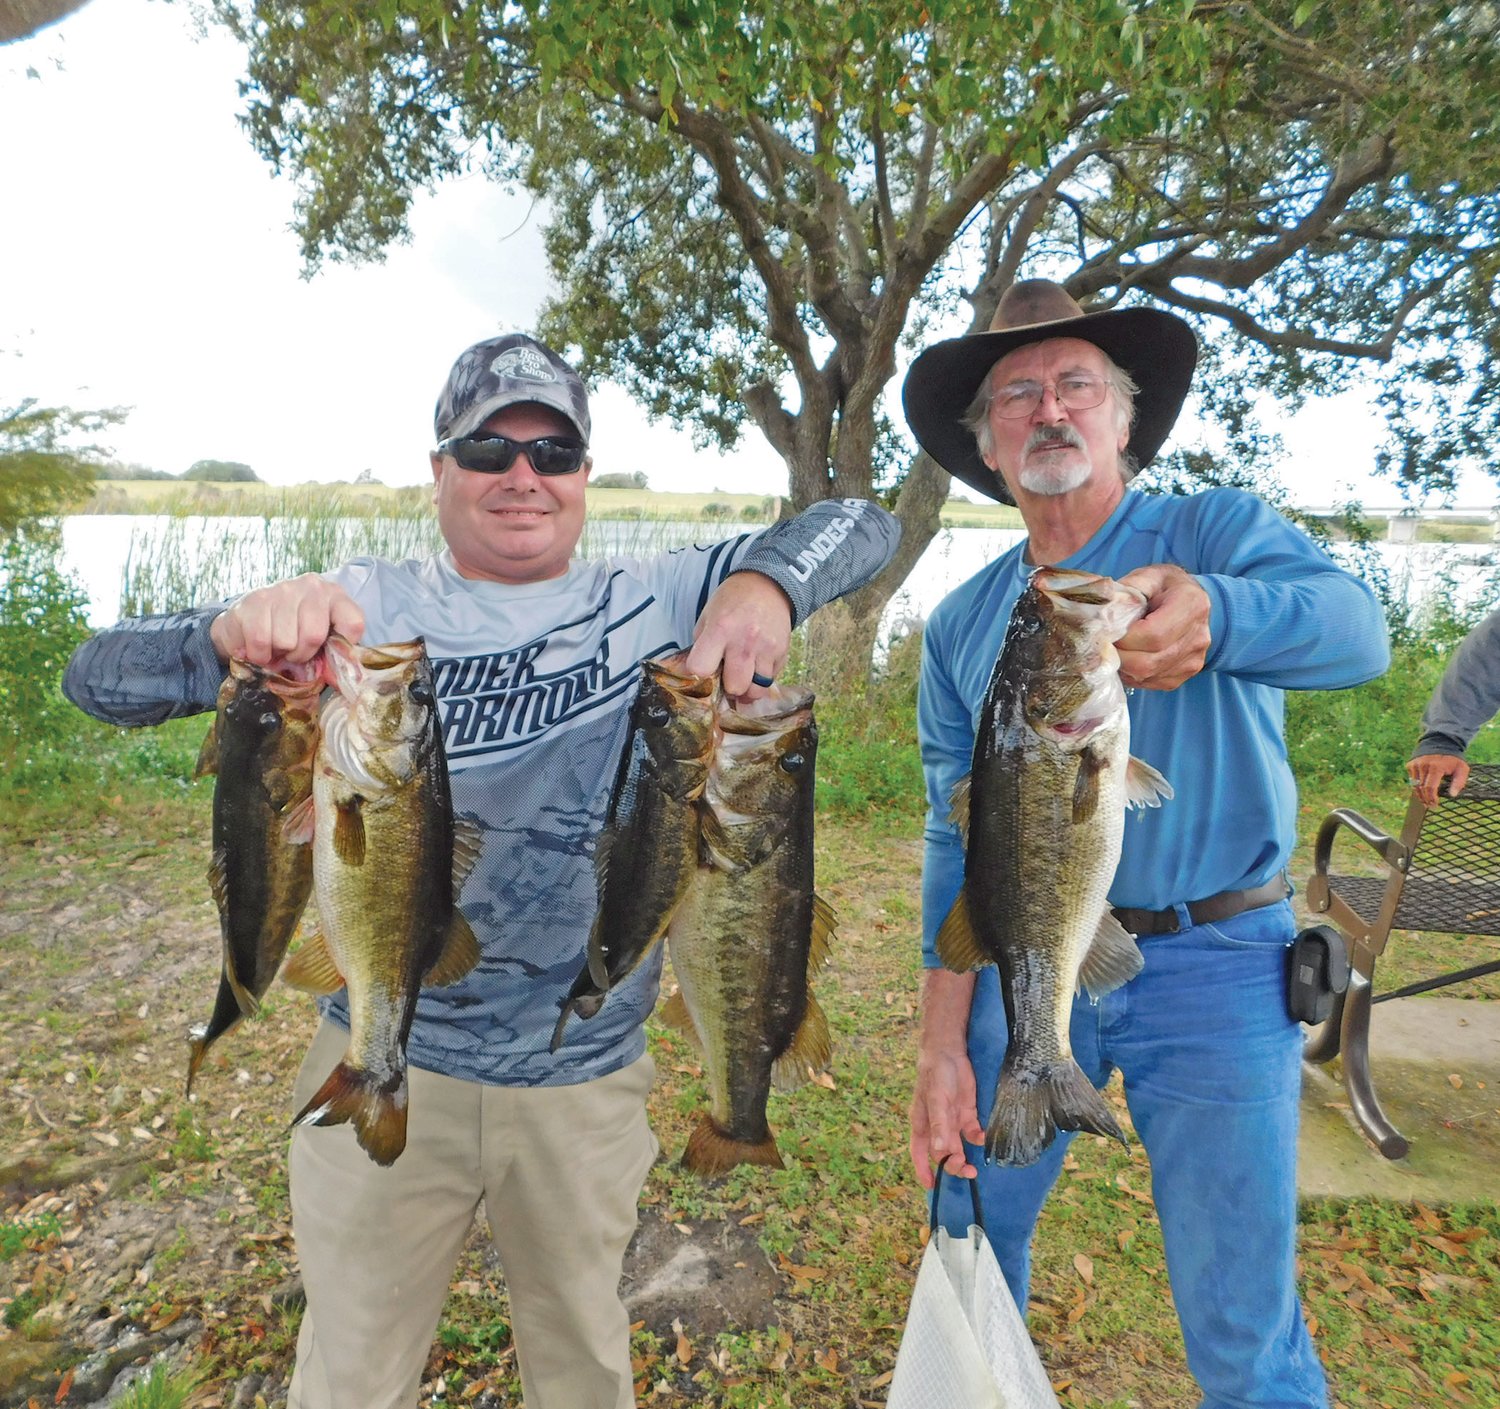 Leroy Bauer and Joe Wozar placed third with 16.52 pounds.